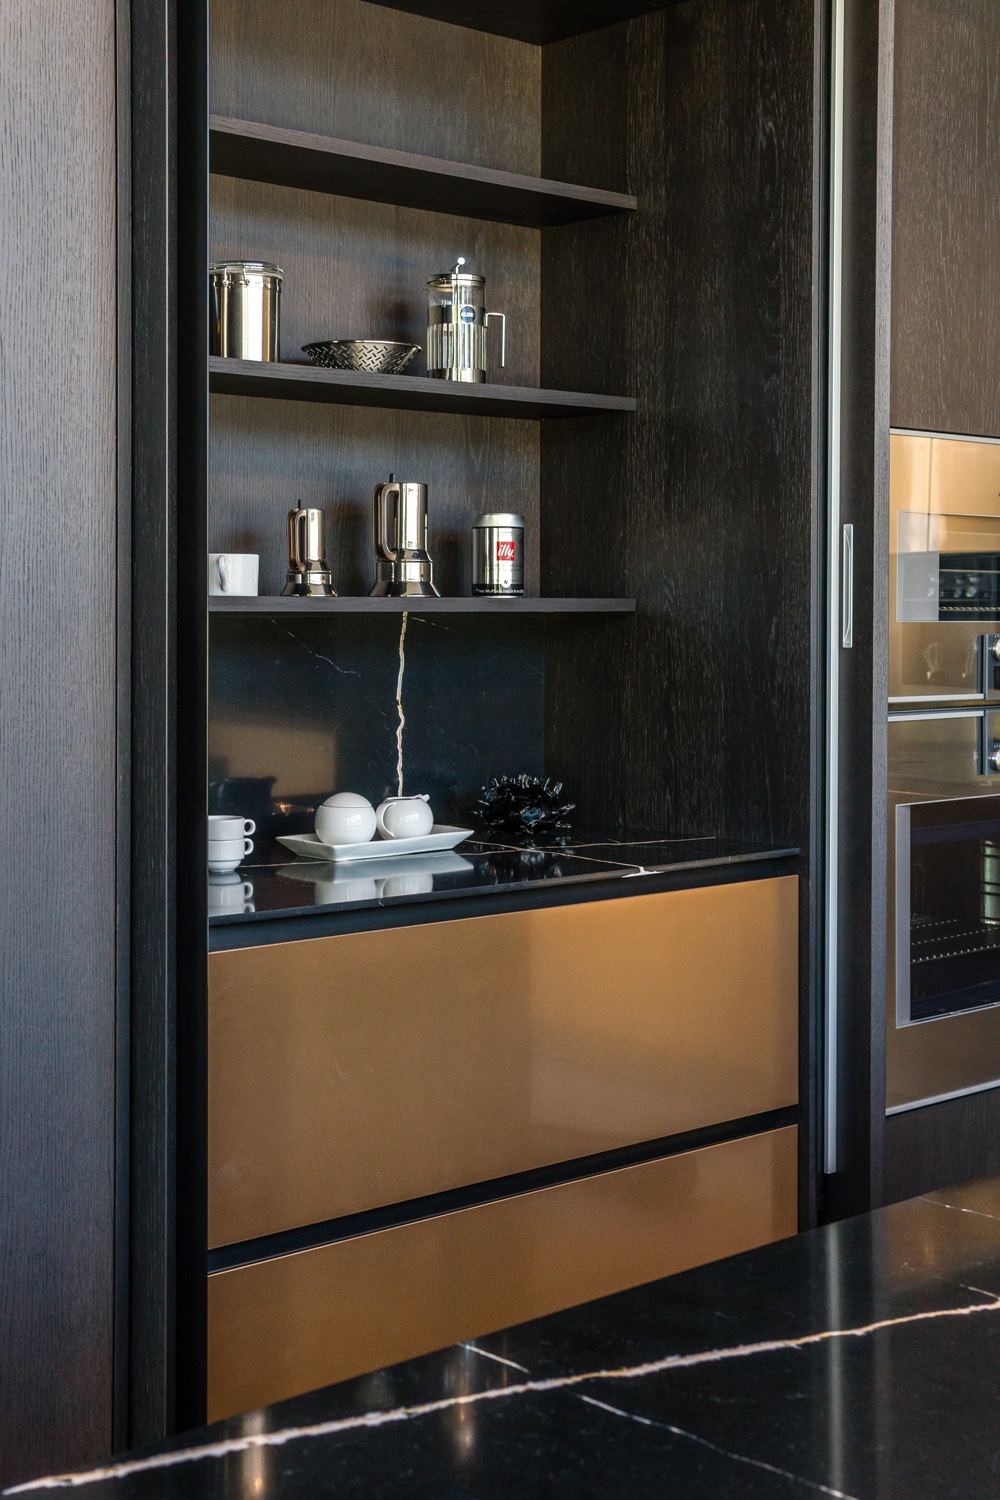 Detail of Los Angeles showroom kitchen in Station oak and Bronze Lux liquid metal. Wing system with pocket doors and a functional surface matching the kitchen countertops. Interior customizable with drawers, shelves, and accessories wall.